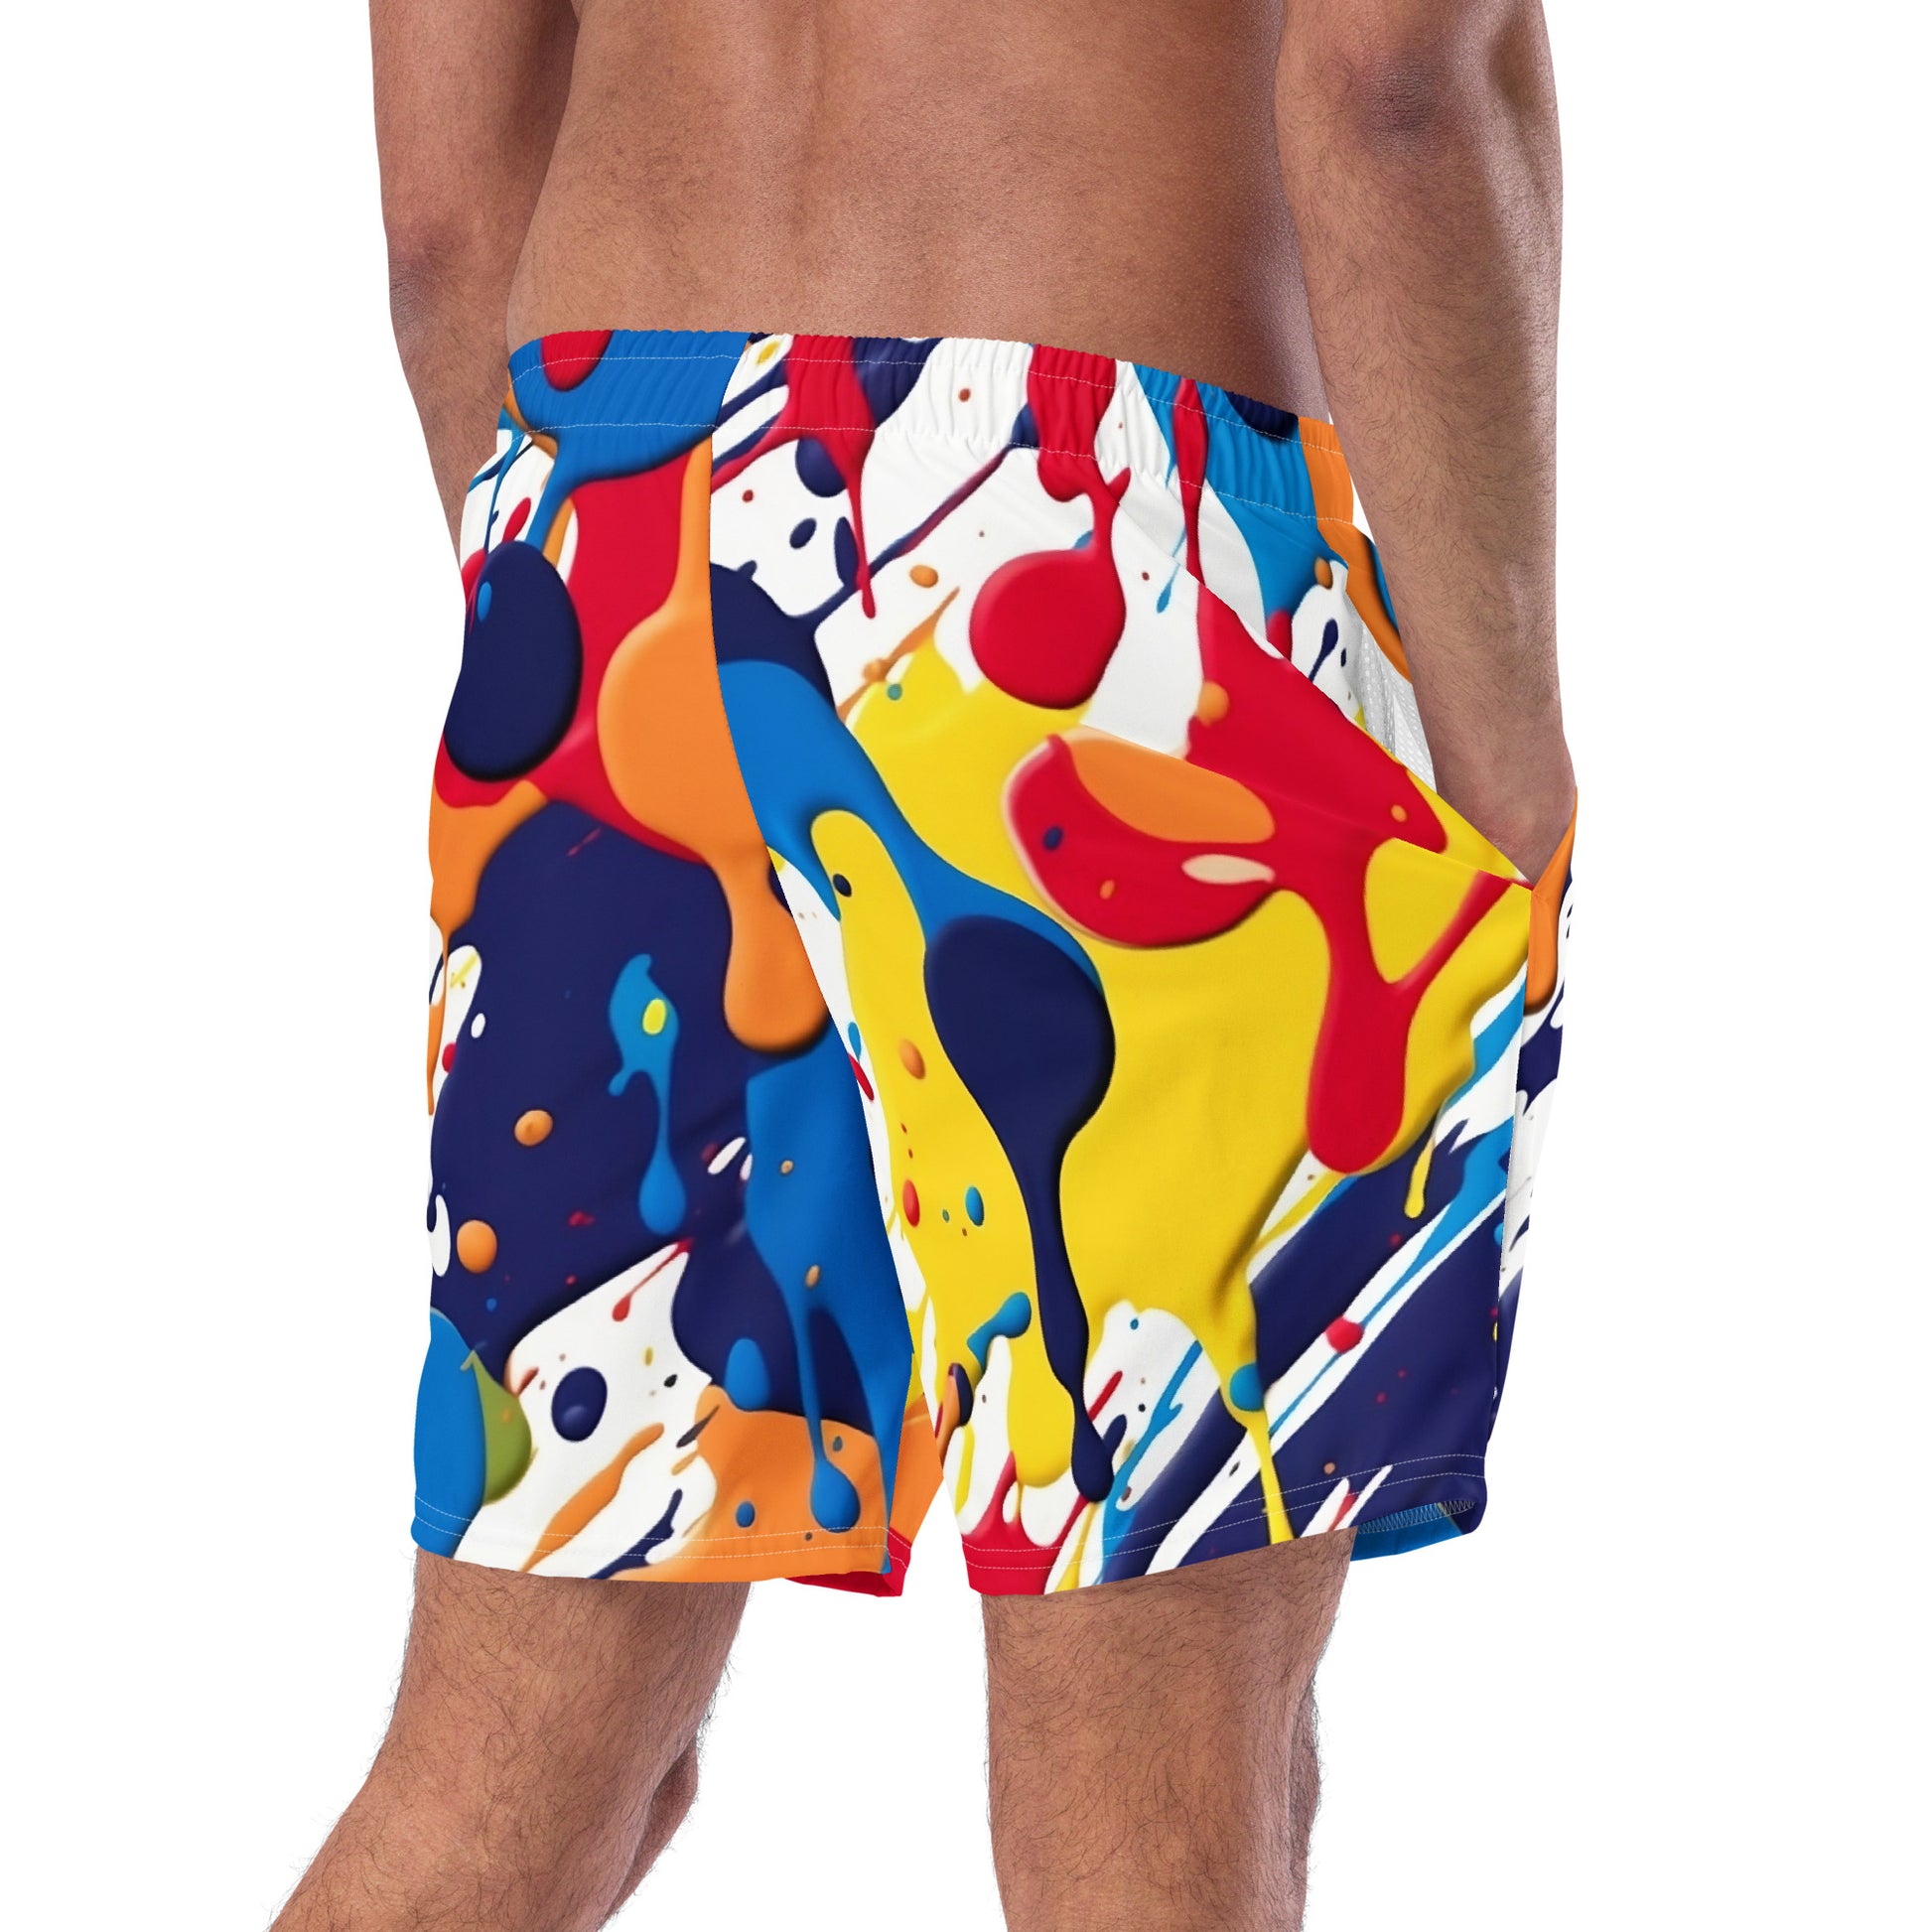 man back with paint splashes swim shorts by B.Different Clothing independent streetwear inspired by street art graffiti